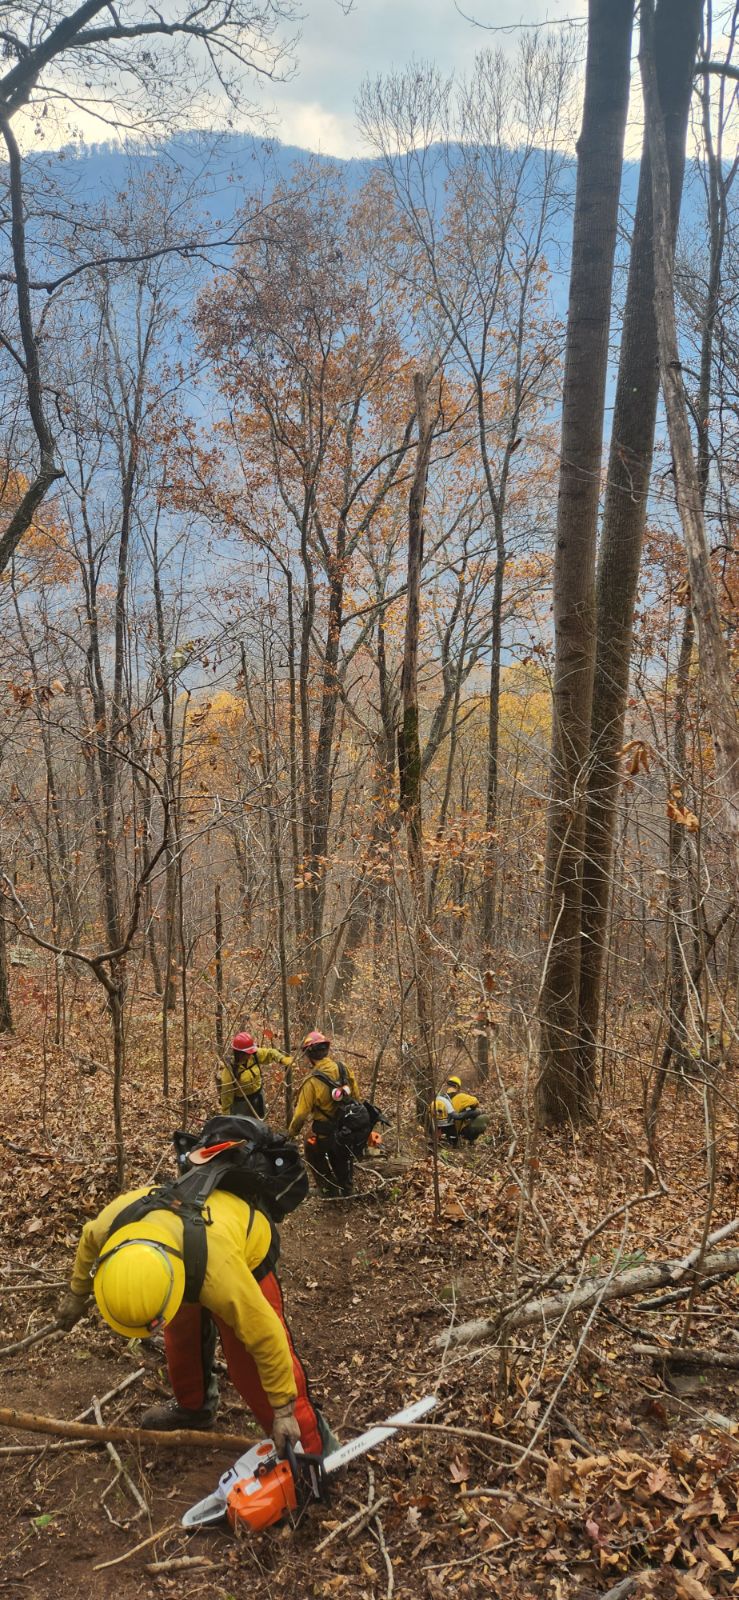 Firefighters in yellow with hand tools